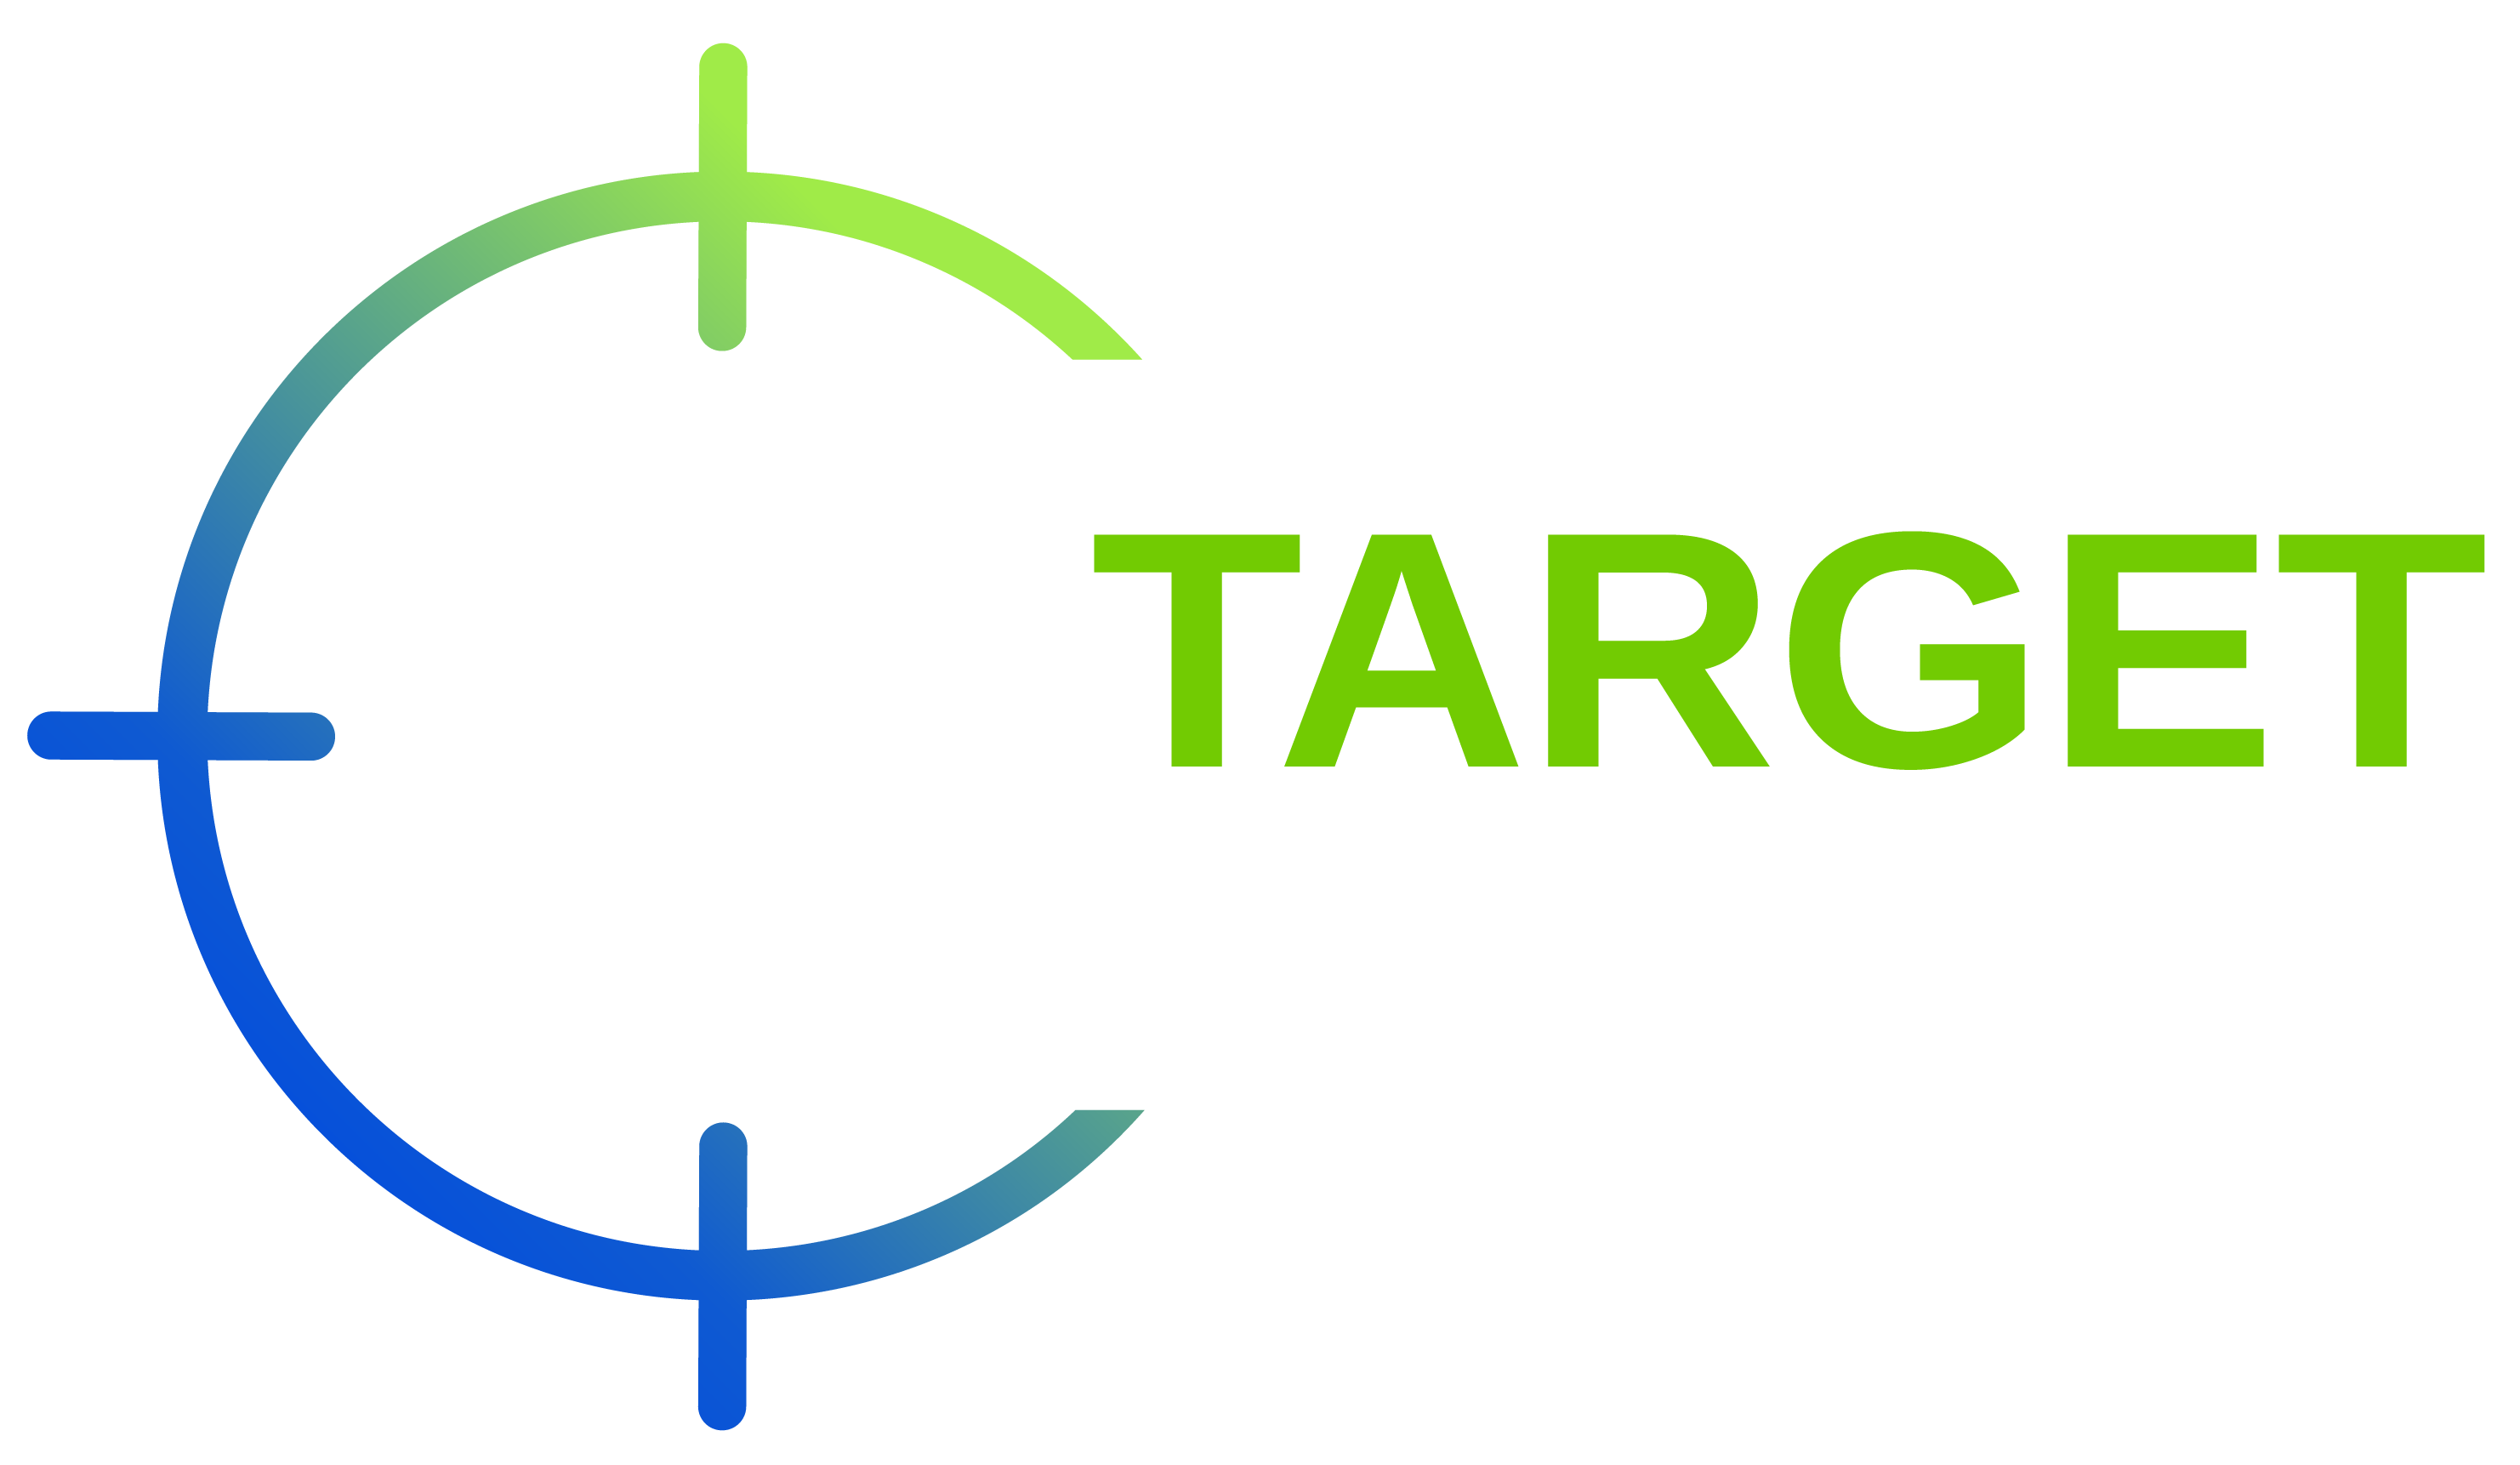 On Target Accounting & Payroll